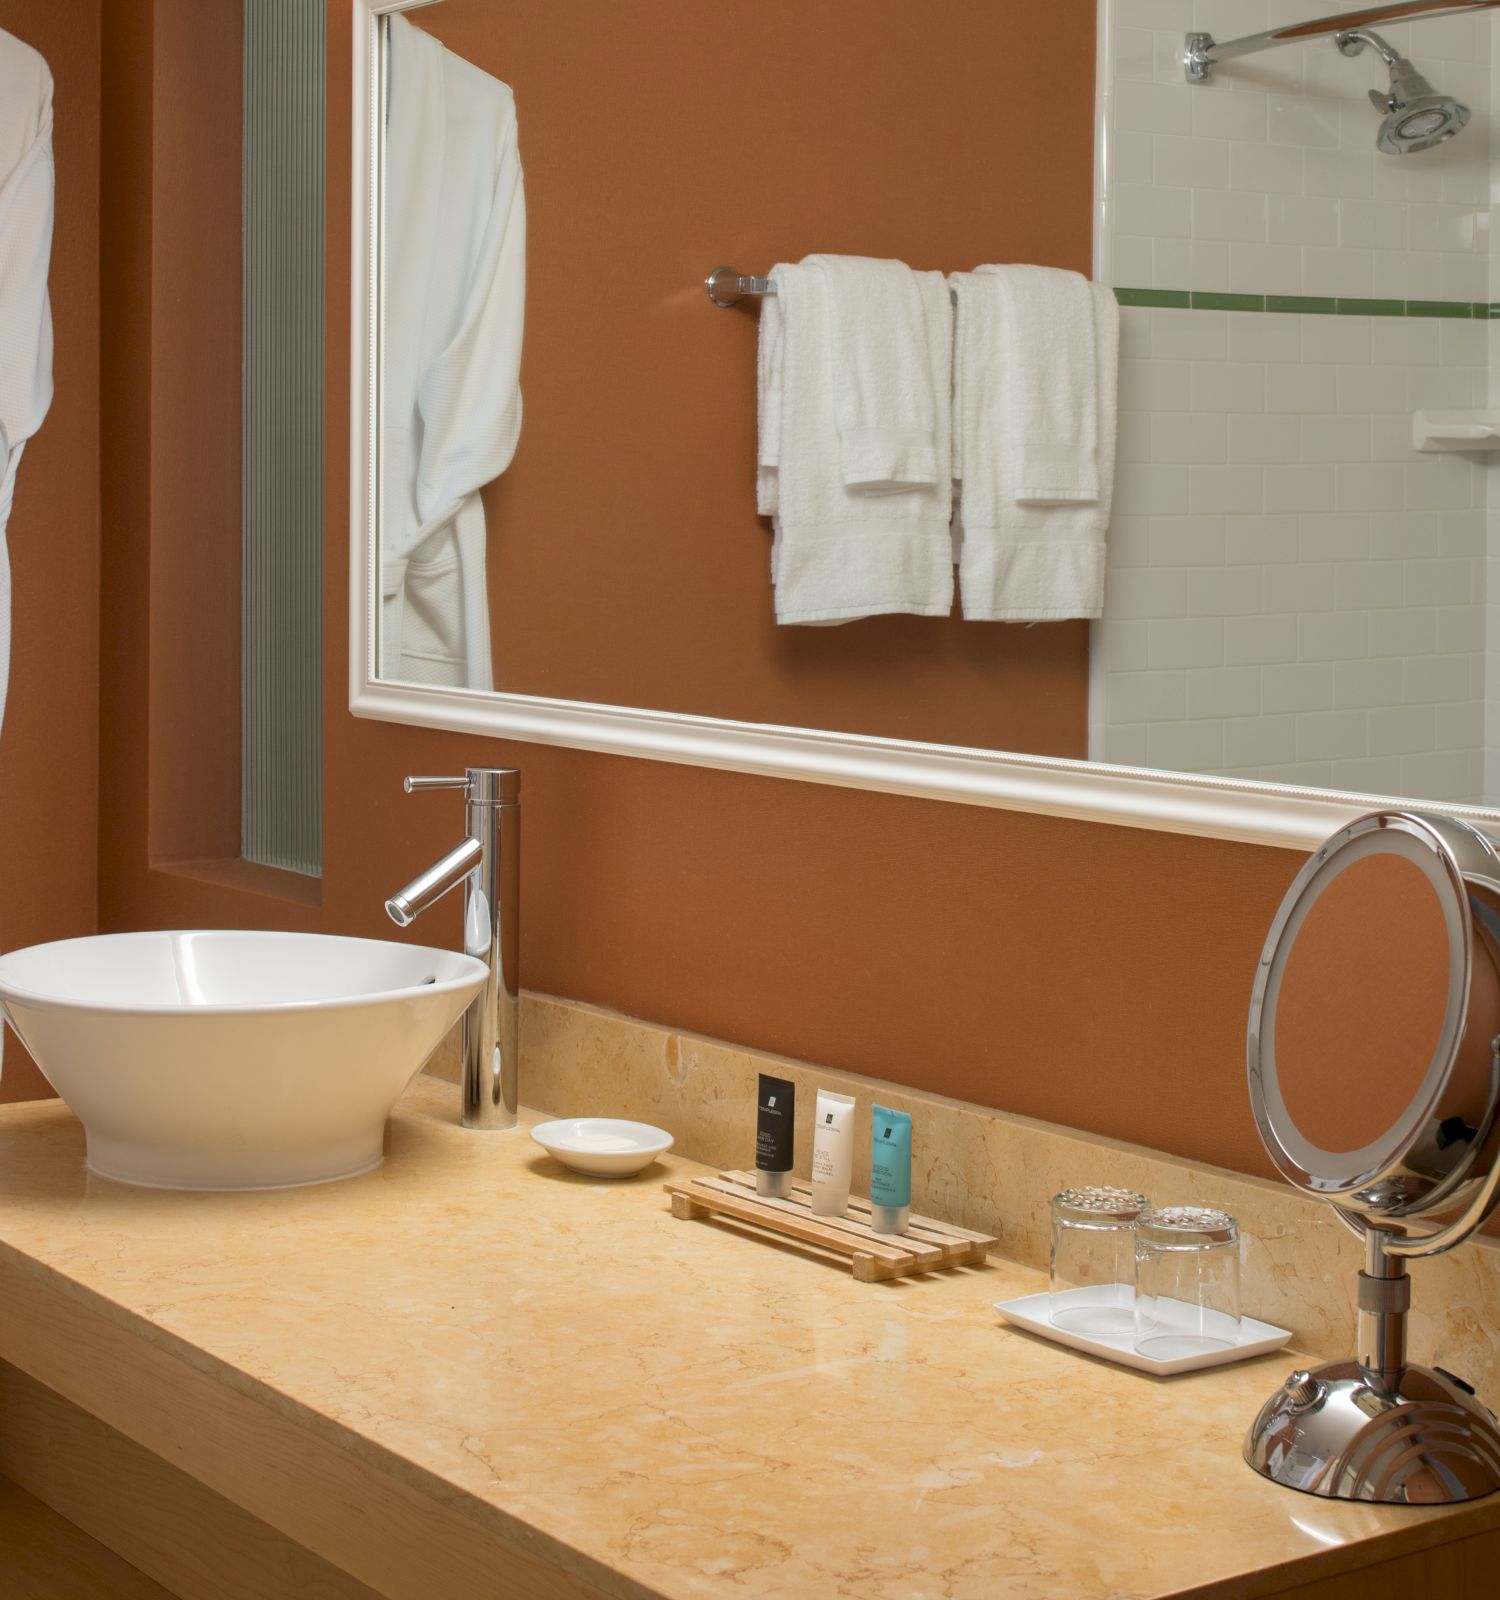 A bathroom with a countertop sink, faucet, mirror, round magnifying mirror, toiletries, towels, and a hanging bathrobe against a tan wall.